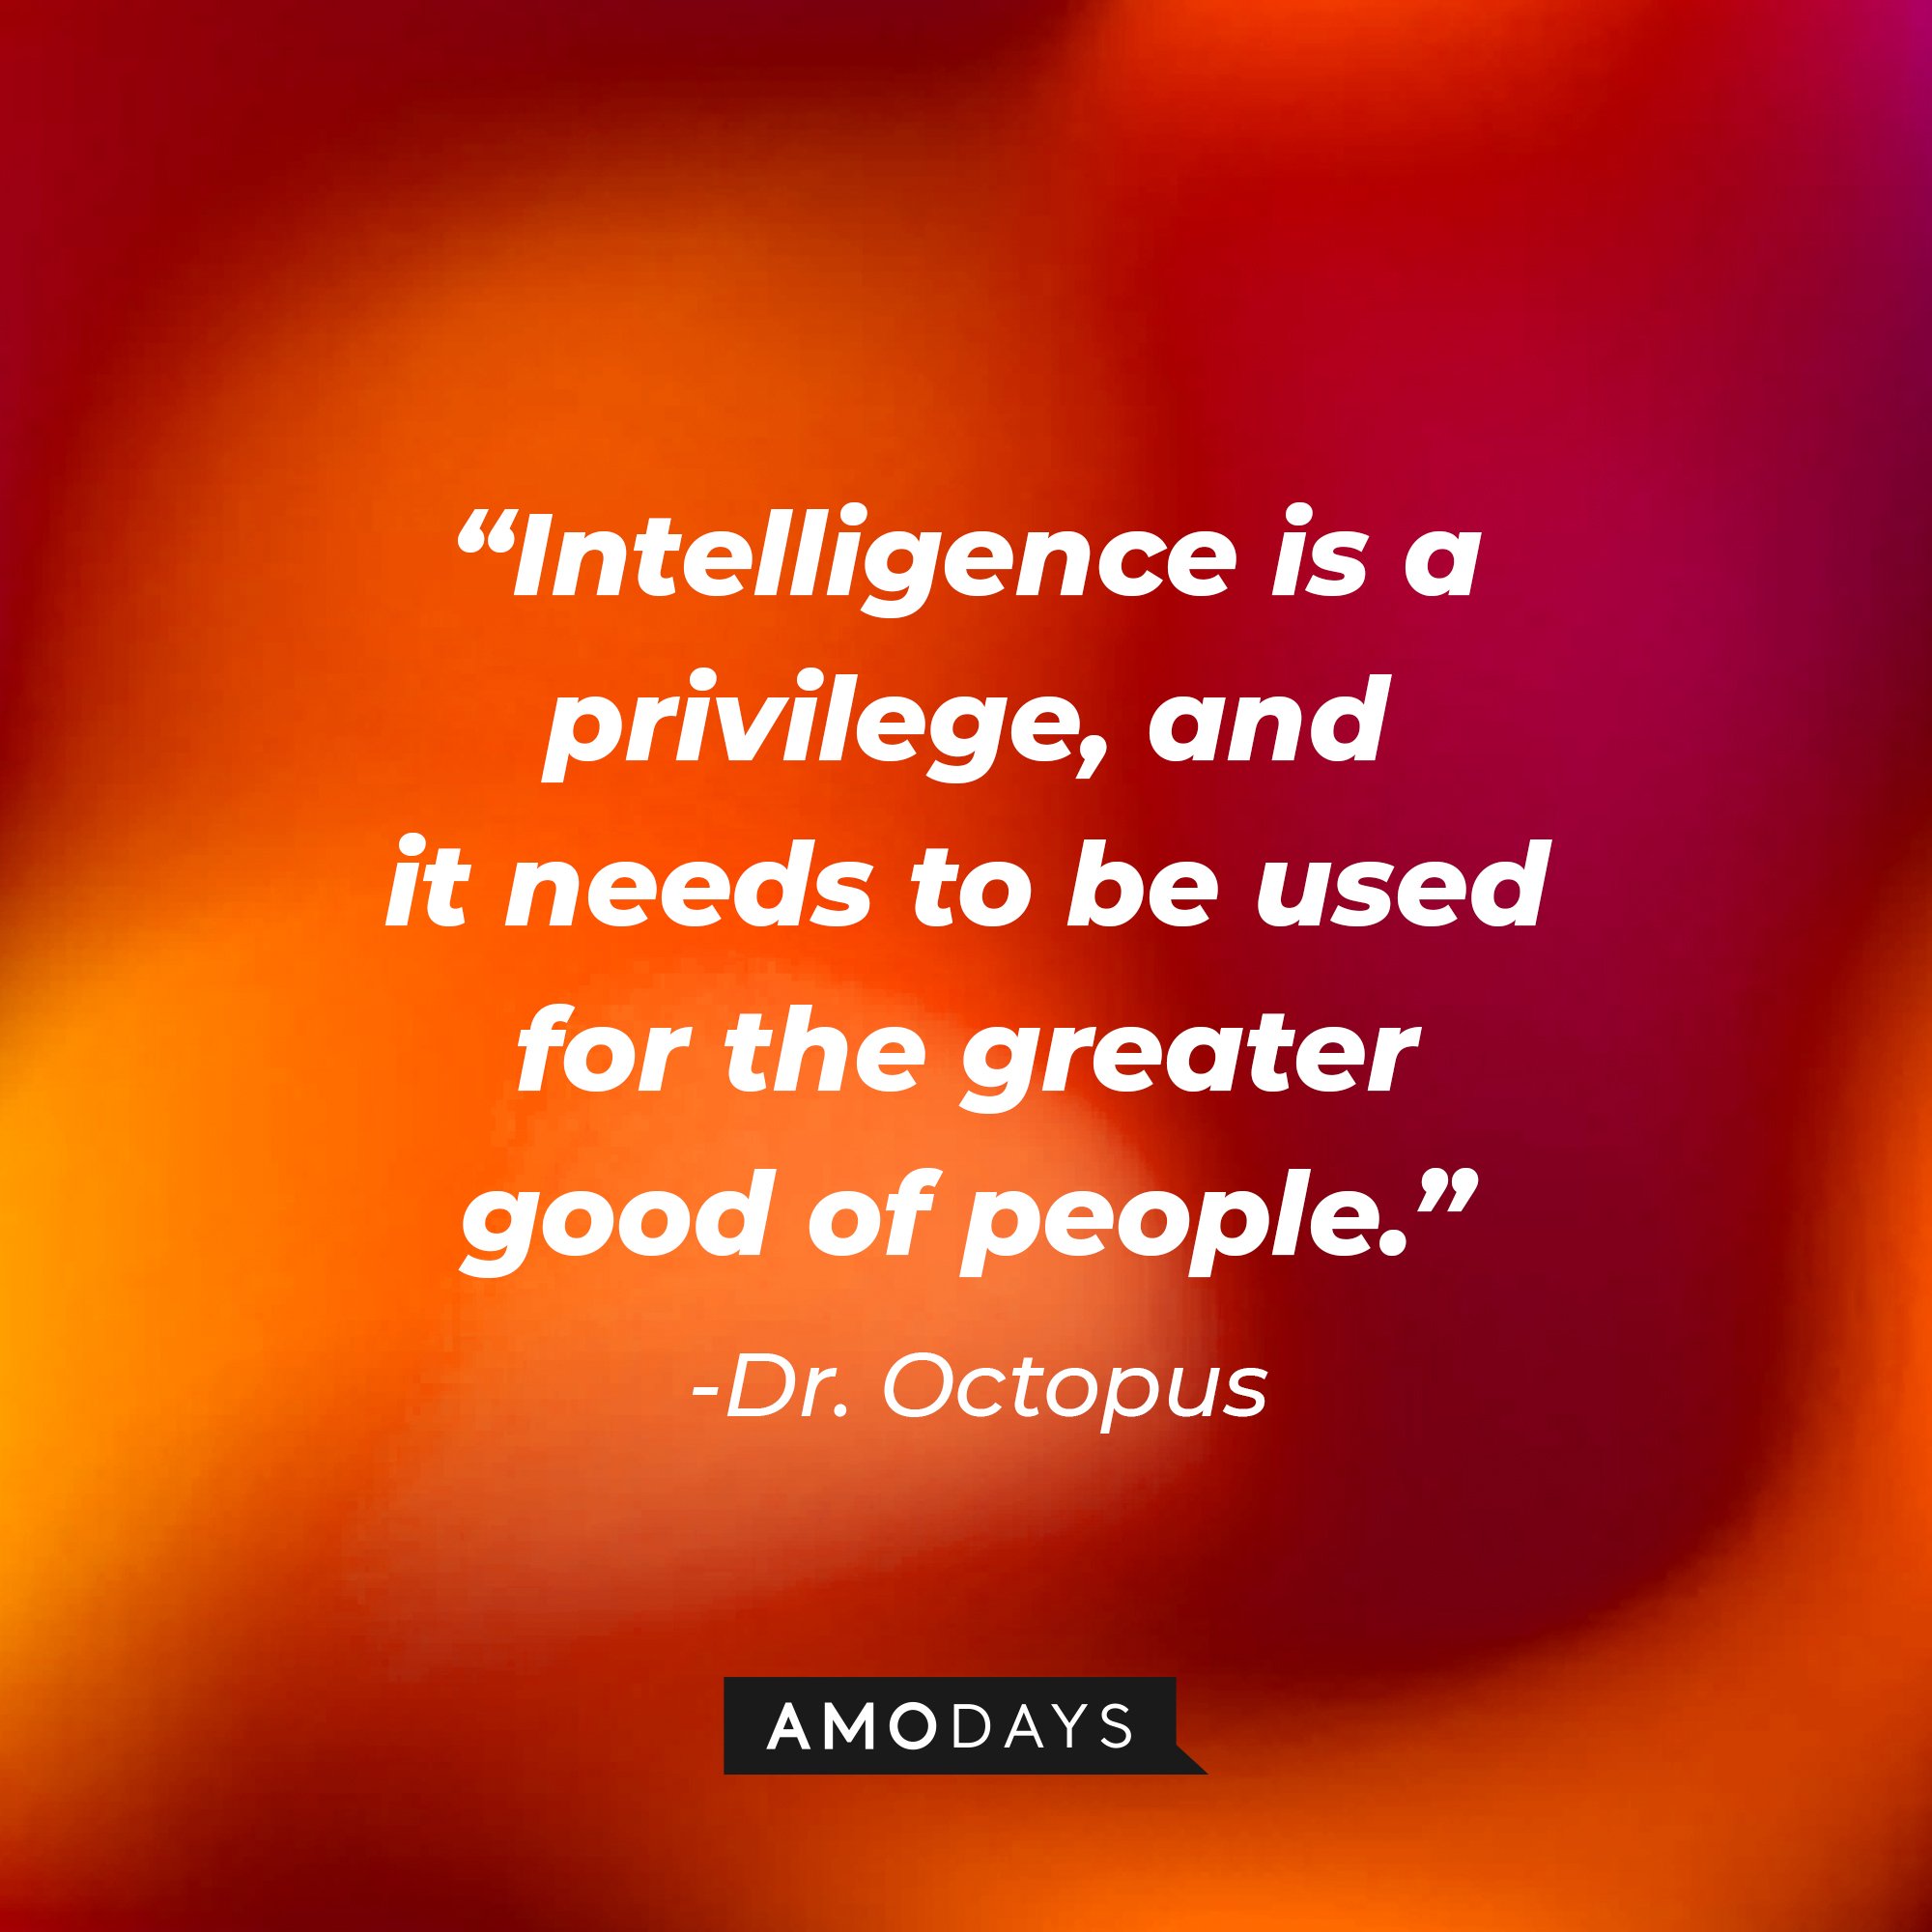 Dr. Octopus's quote: “Intelligence is a privilege, and it needs to be used for the greater good of people.” | Image: AmoDays